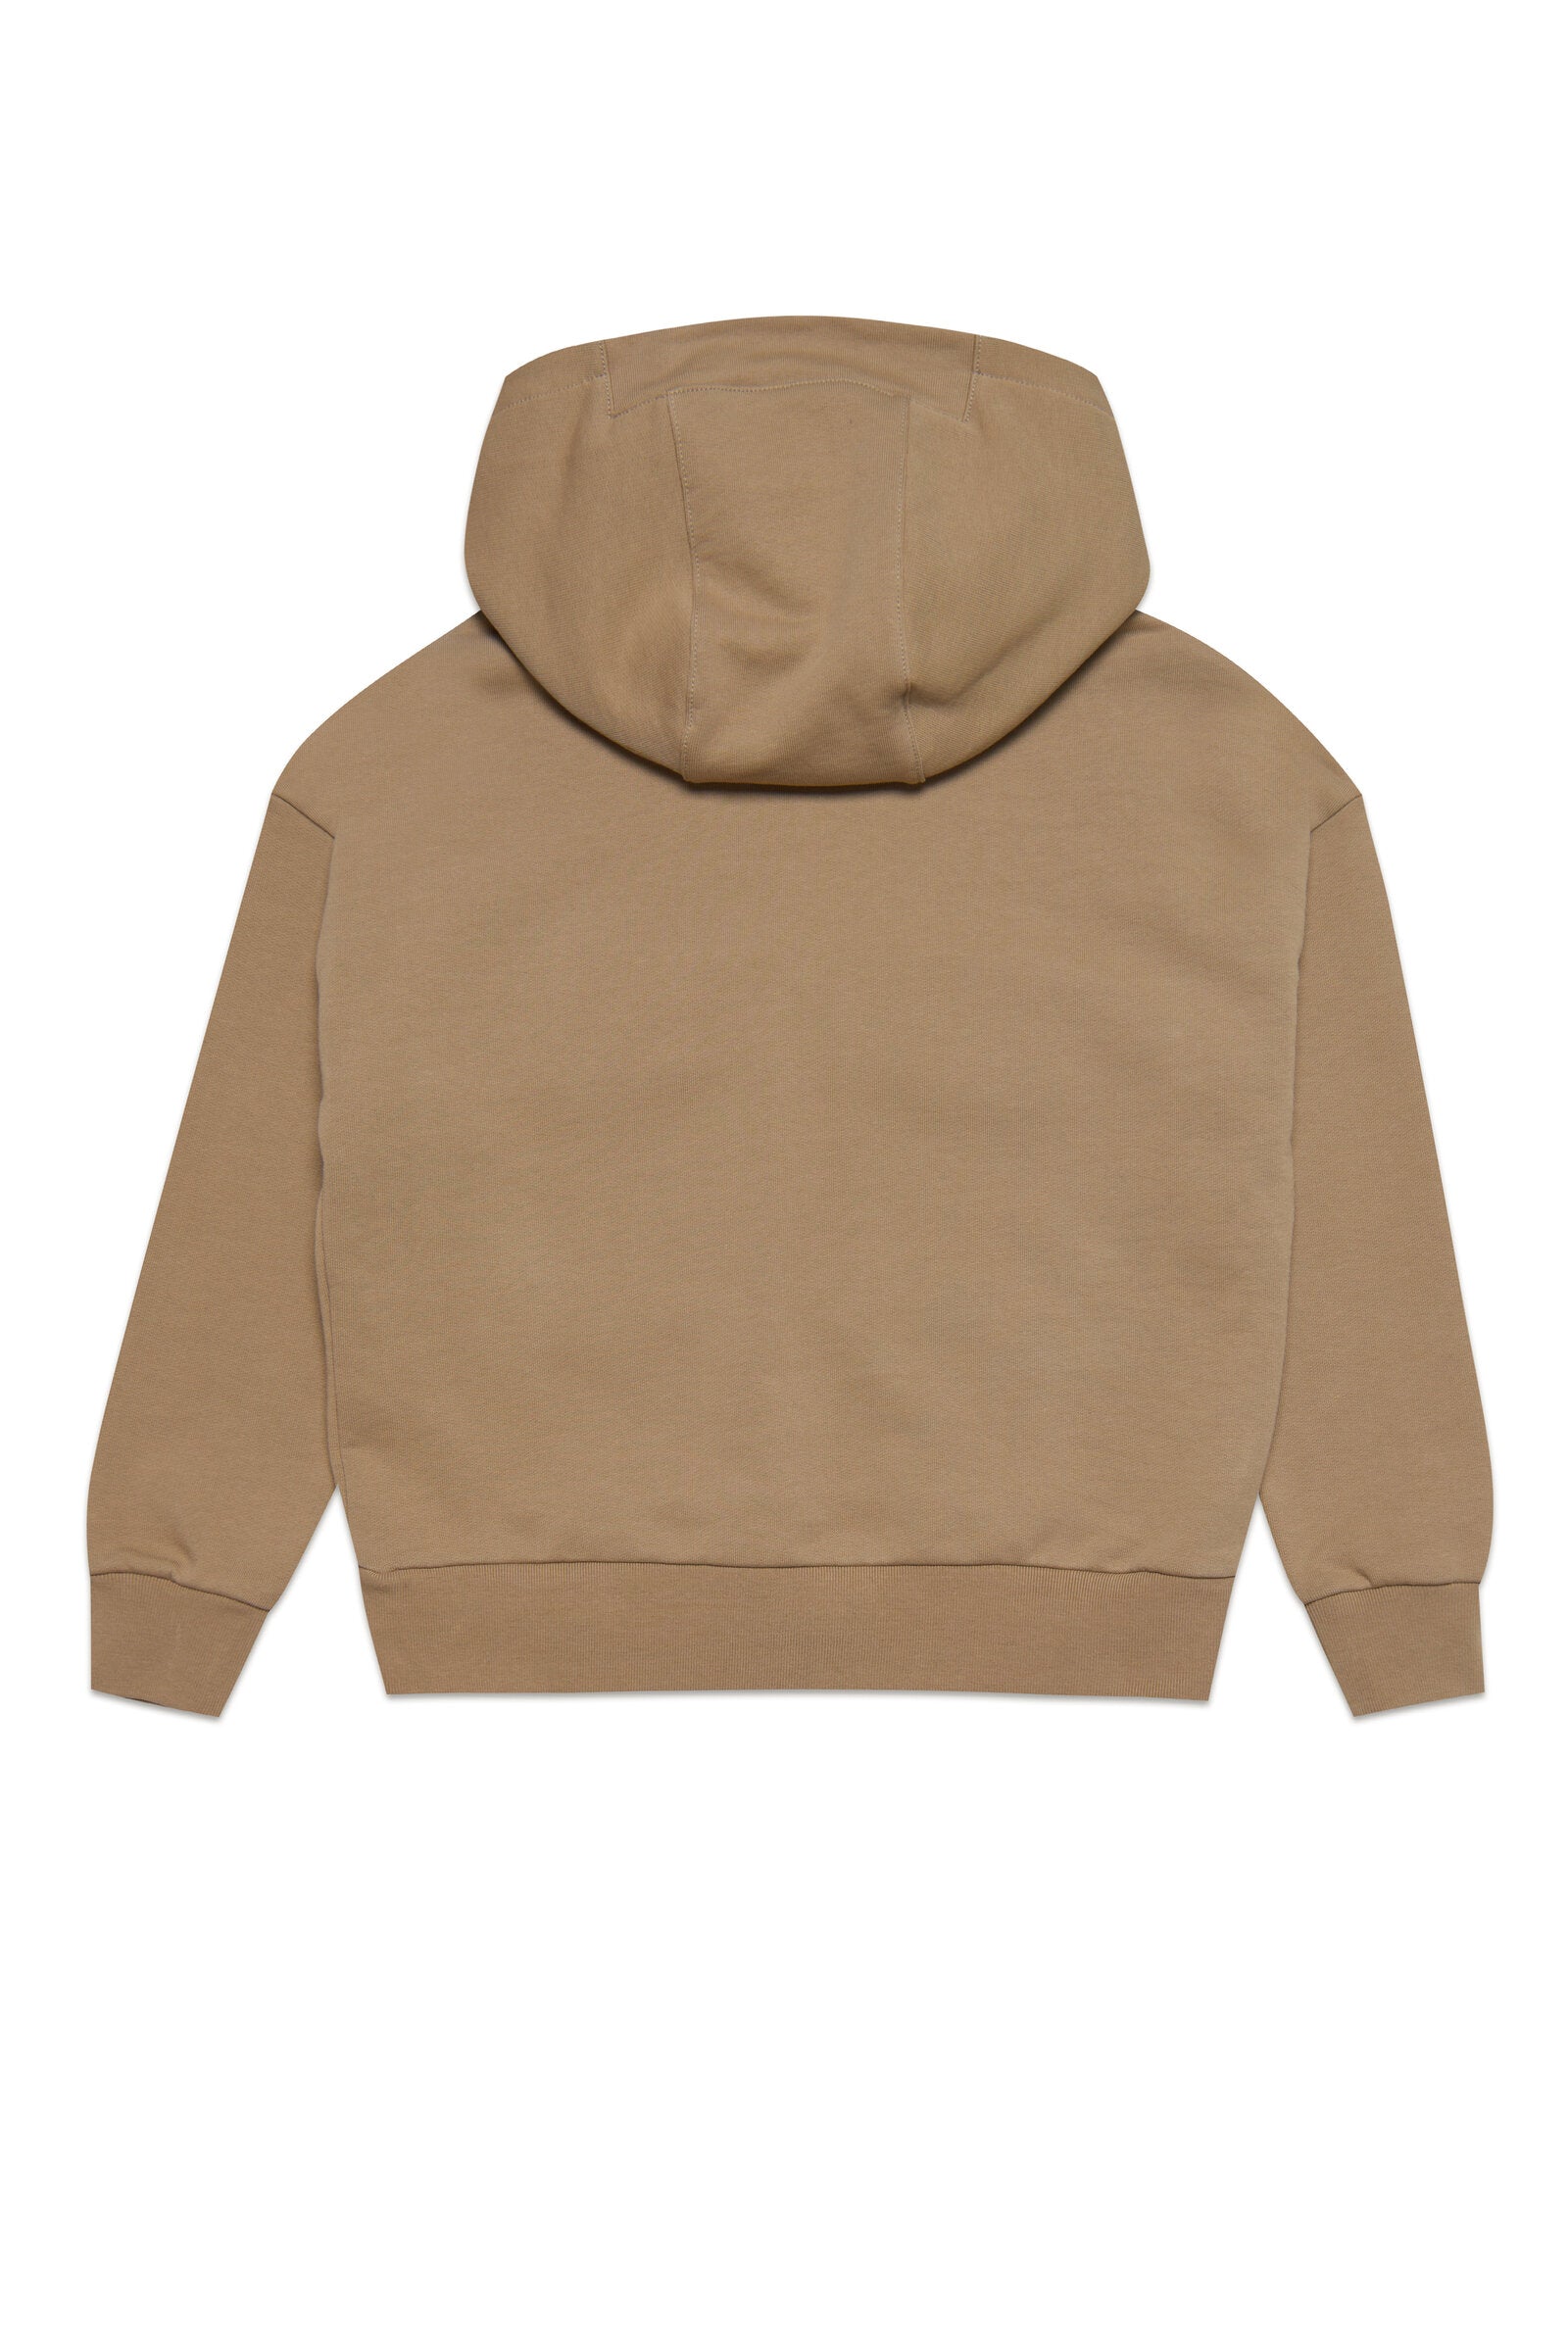 Cotton hooded sweatshirt with pockets